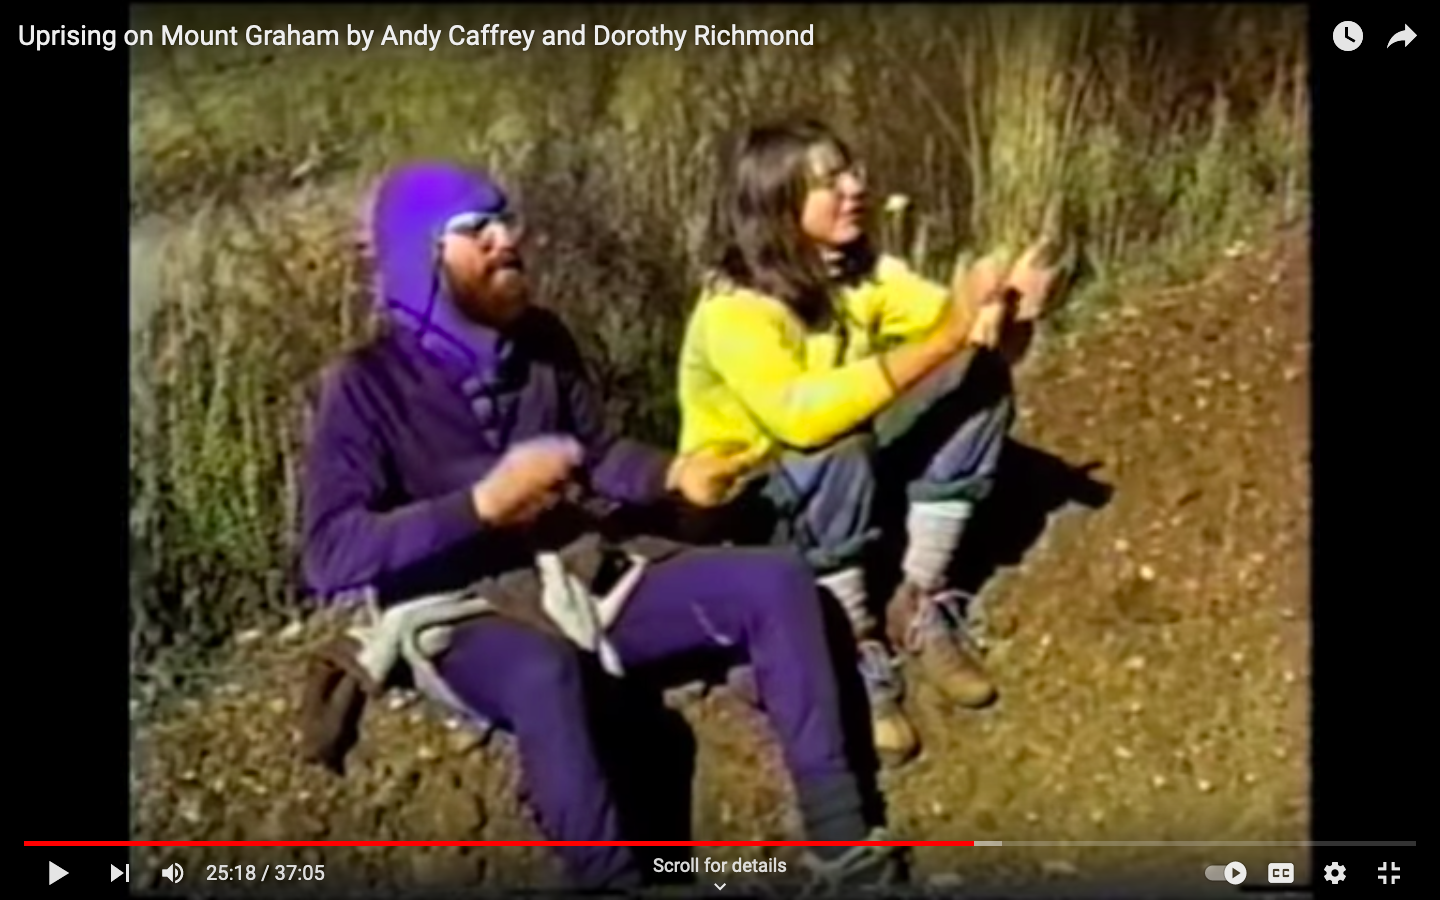 Screen grab from the short film Uprising on Mt Graham, showing two people singing